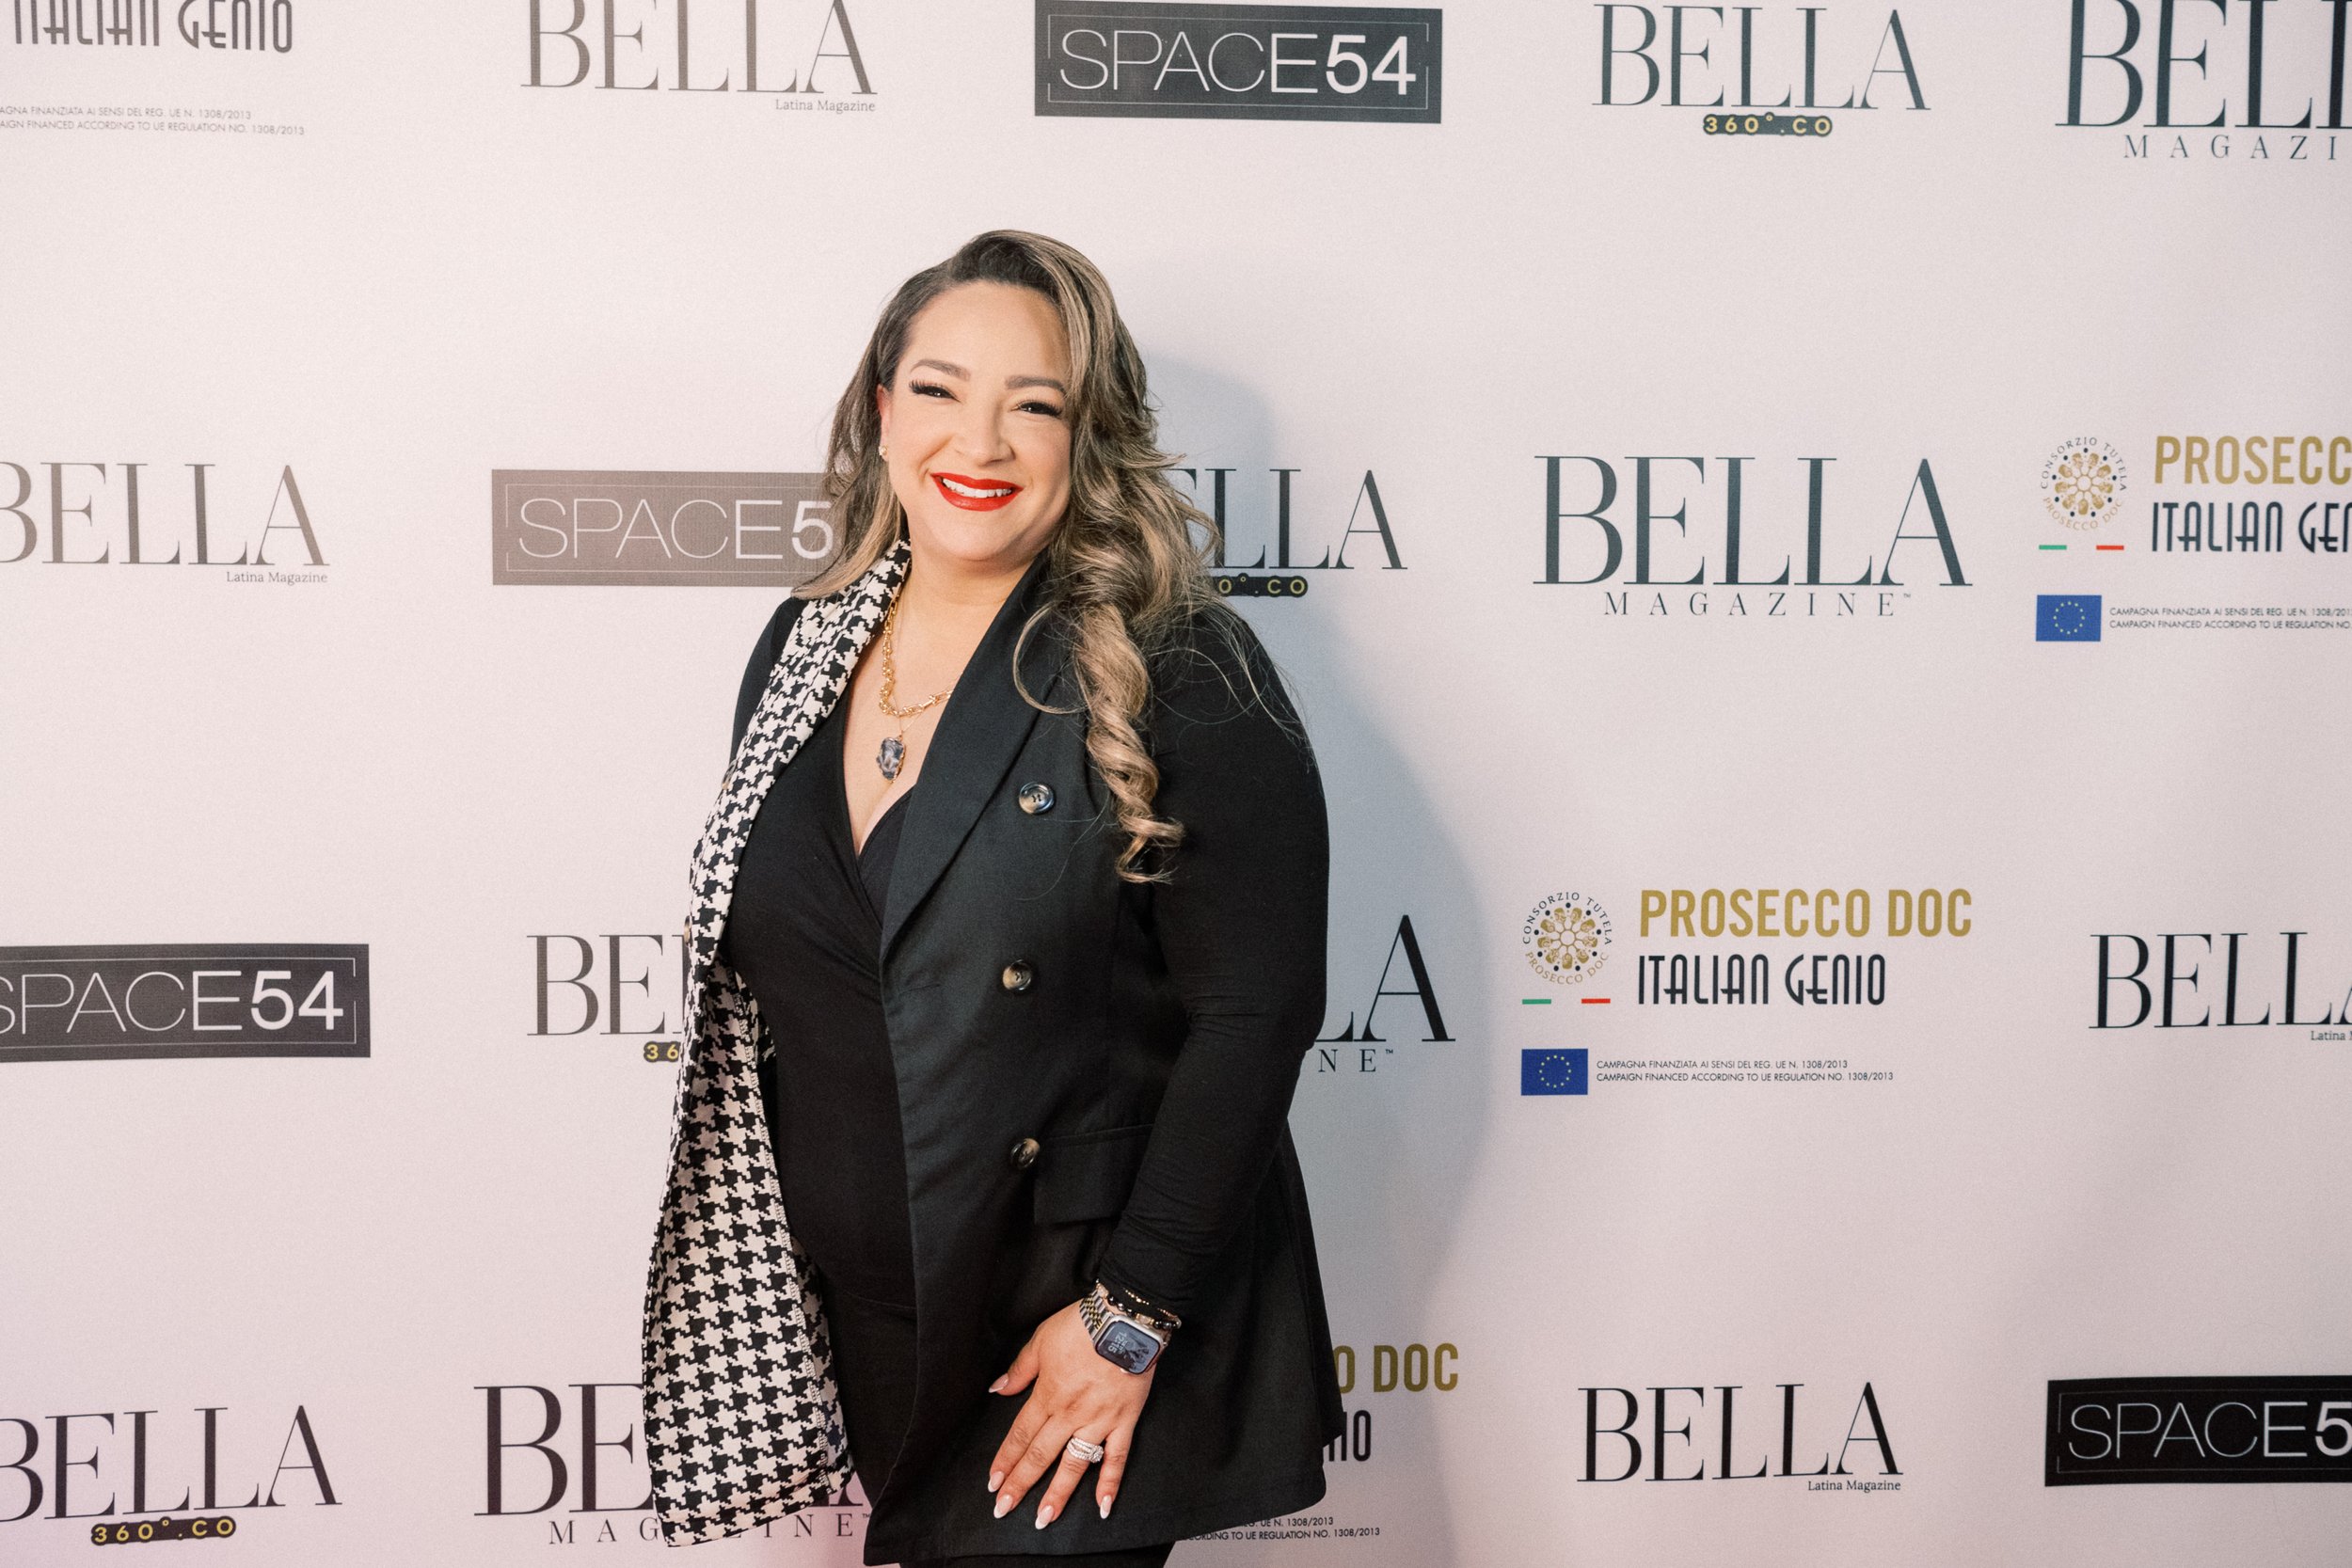 Michelle-Behre-Creative-Co-BELLA-Magazine-Co-Women-of-Influence-Cover-Party-Space54-NYC-122.jpg